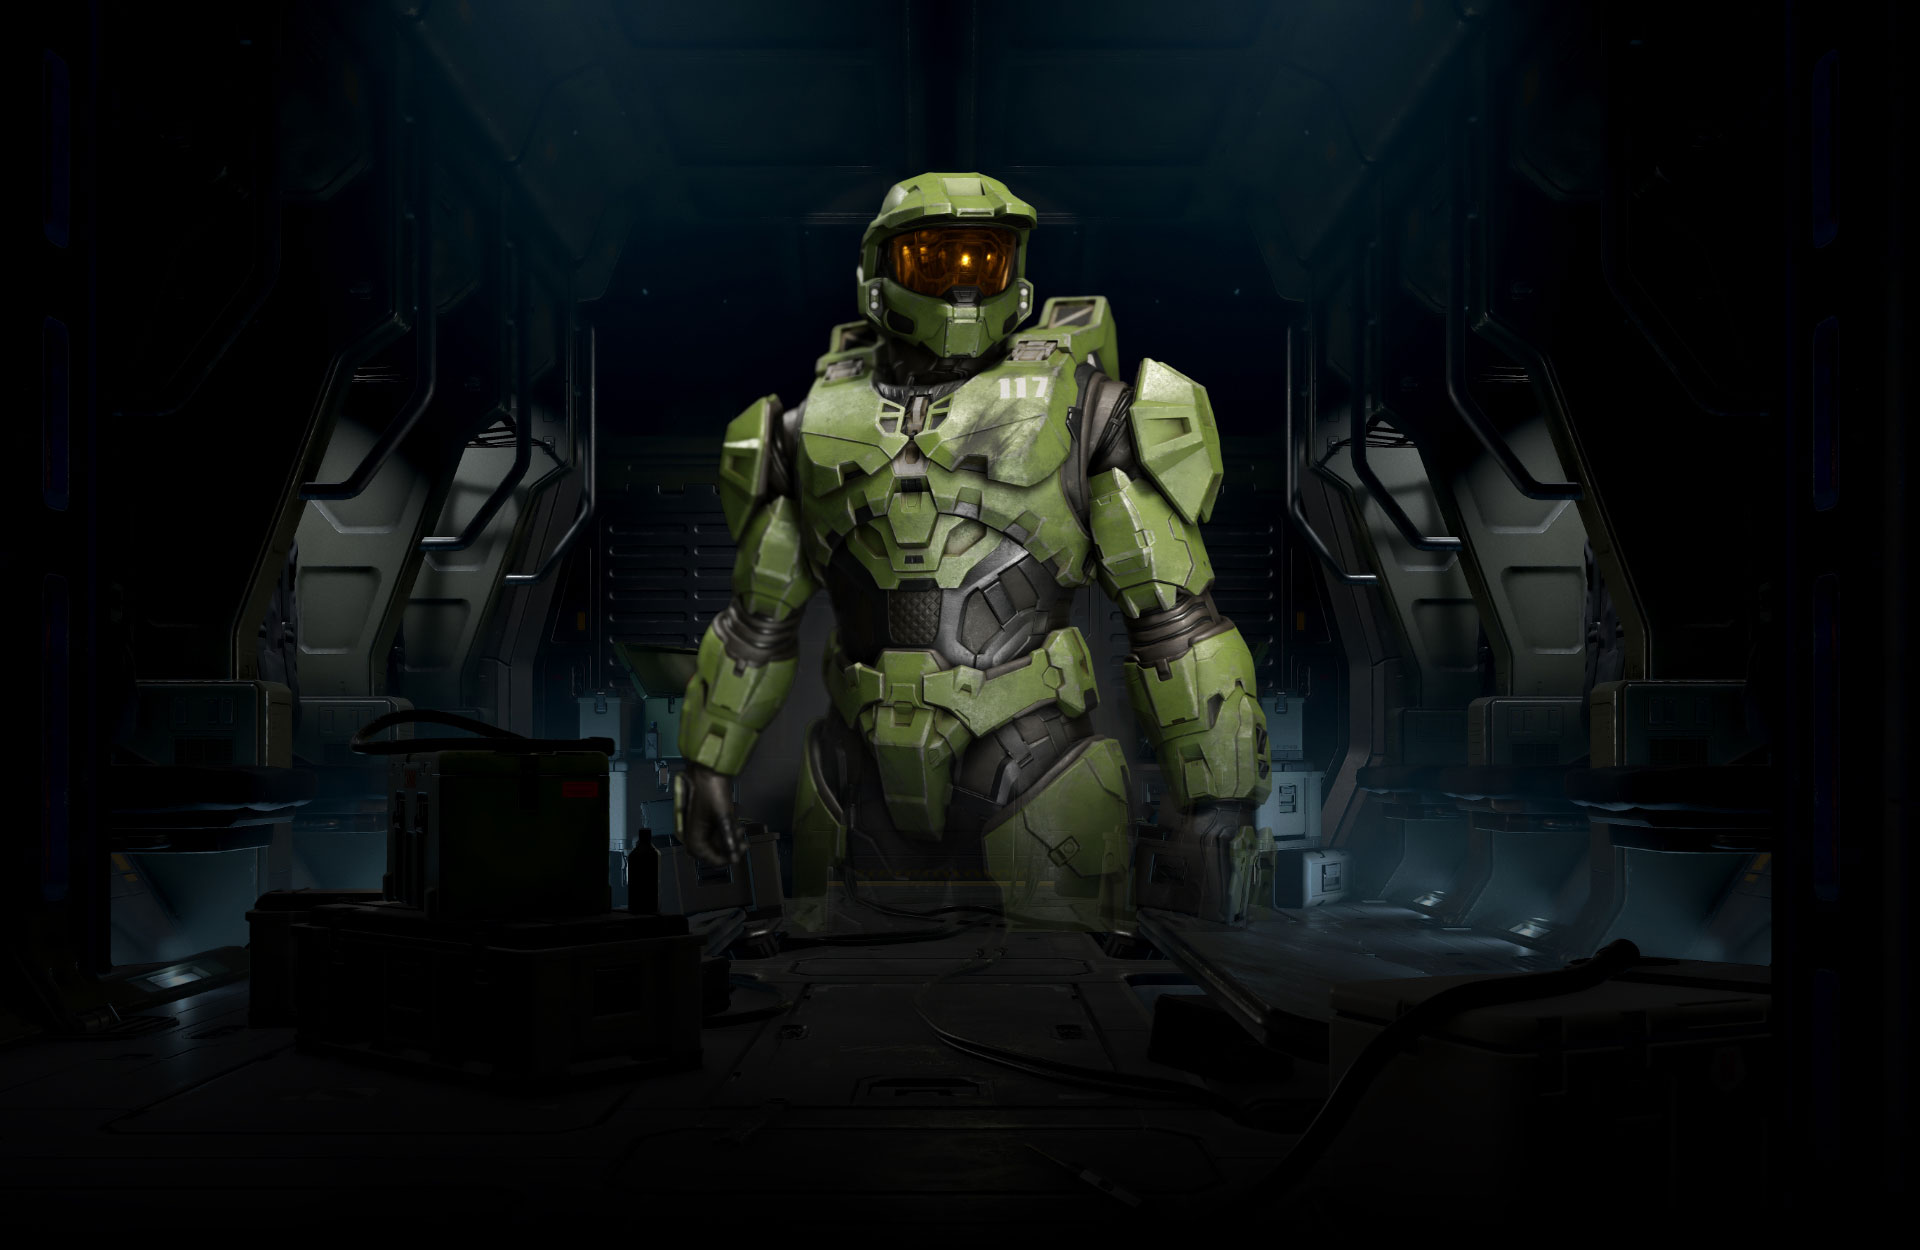 Halo Infinite. Master Chief stands in a dimly lit room, the front of his armour slightly damaged under the “117” on his chest.